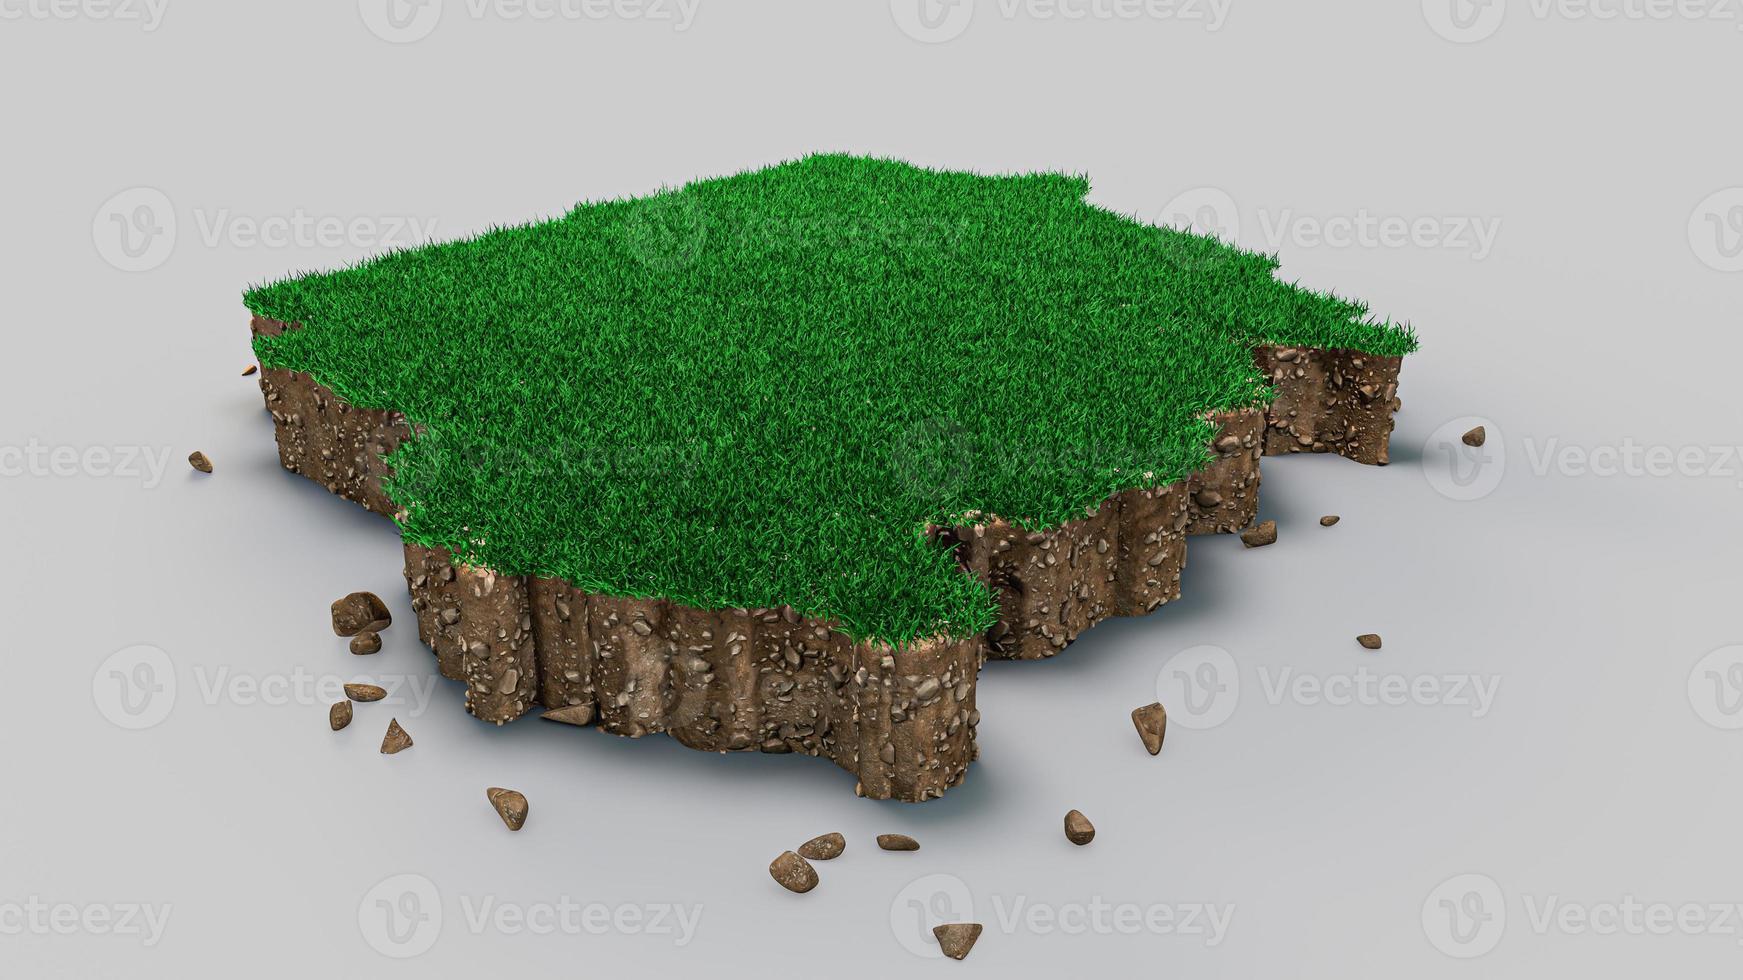 Sudan Map Grass and ground texture 3d illustration photo